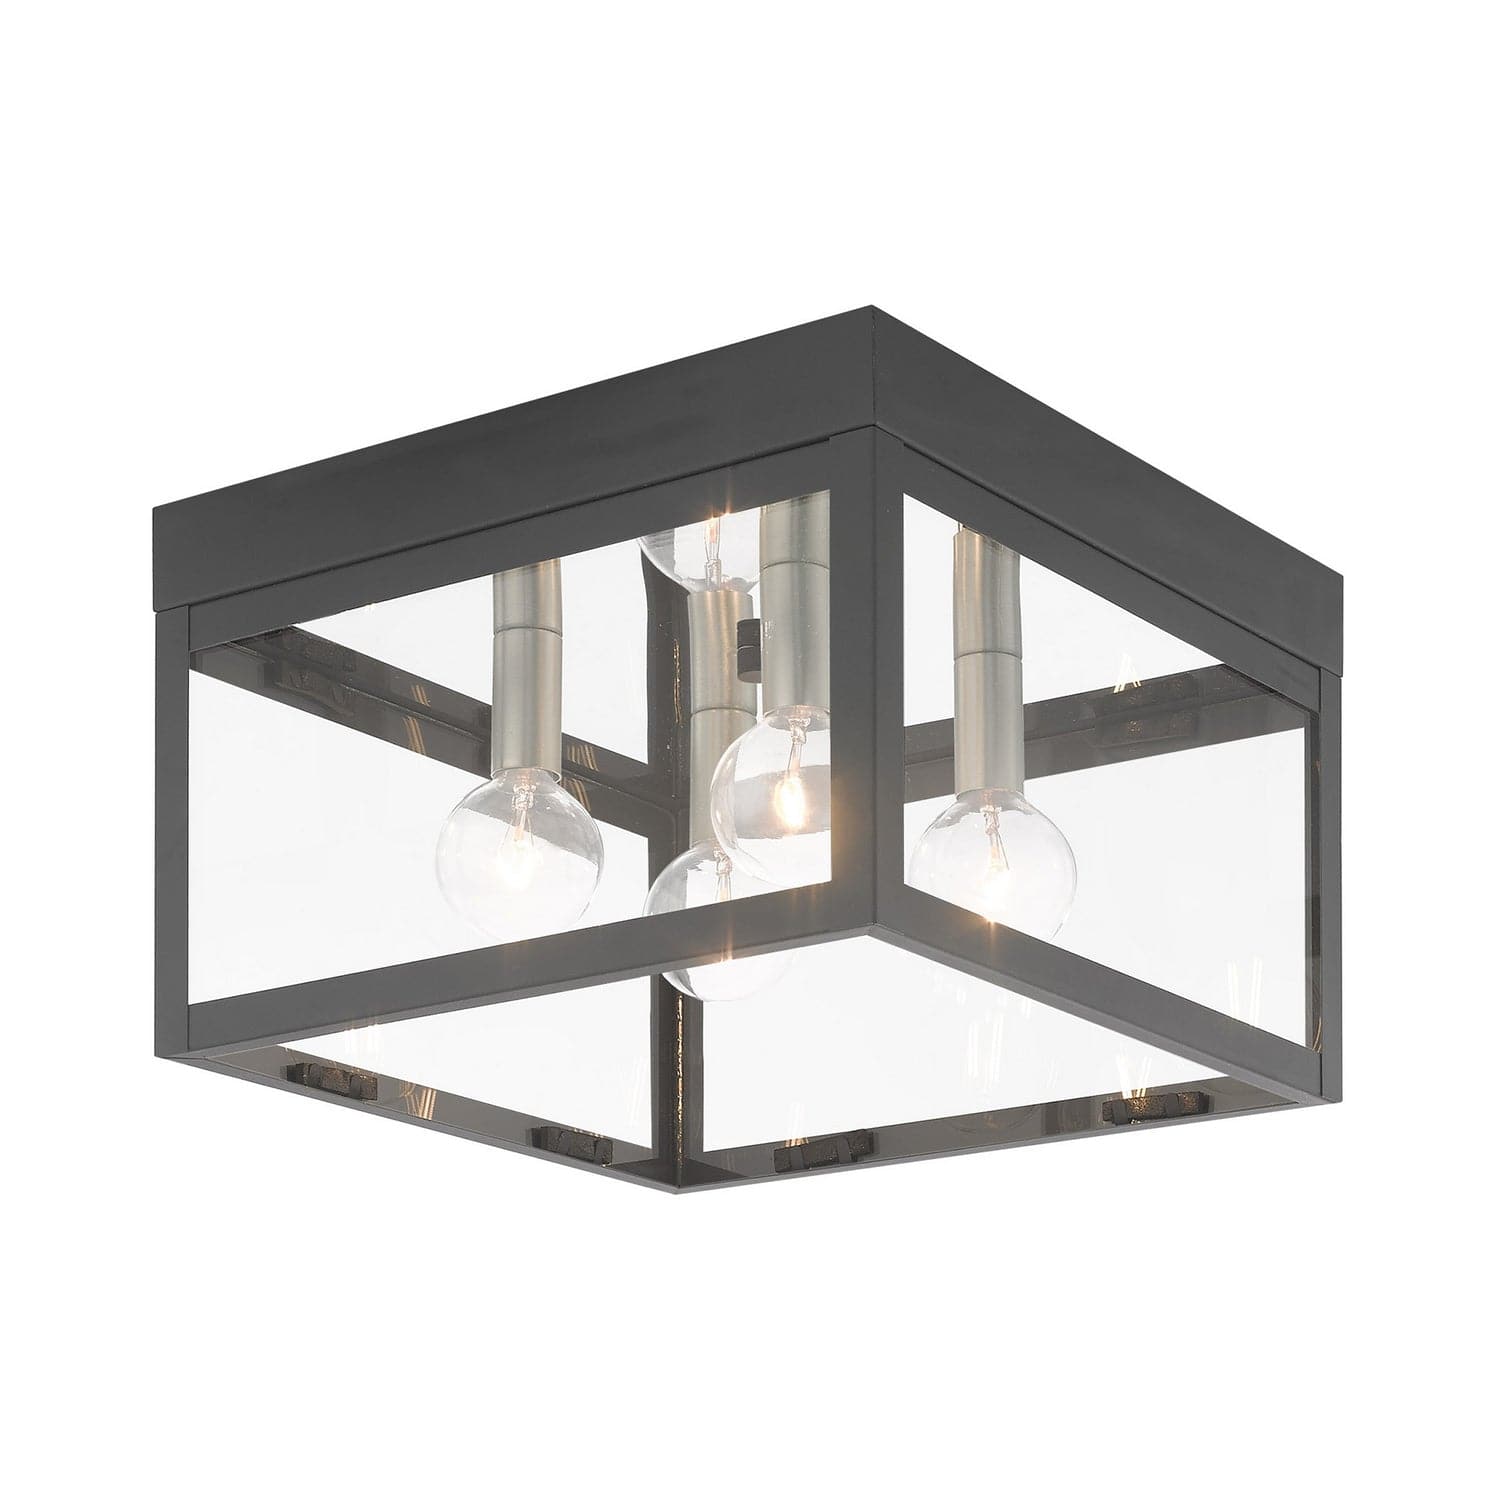 Livex Lighting - 20589-76 - Four Light Outdoor Ceiling Mount - Nyack - Scandinavian Gray w/ Brushed Nickels and Polished Chrome Stainless Steel